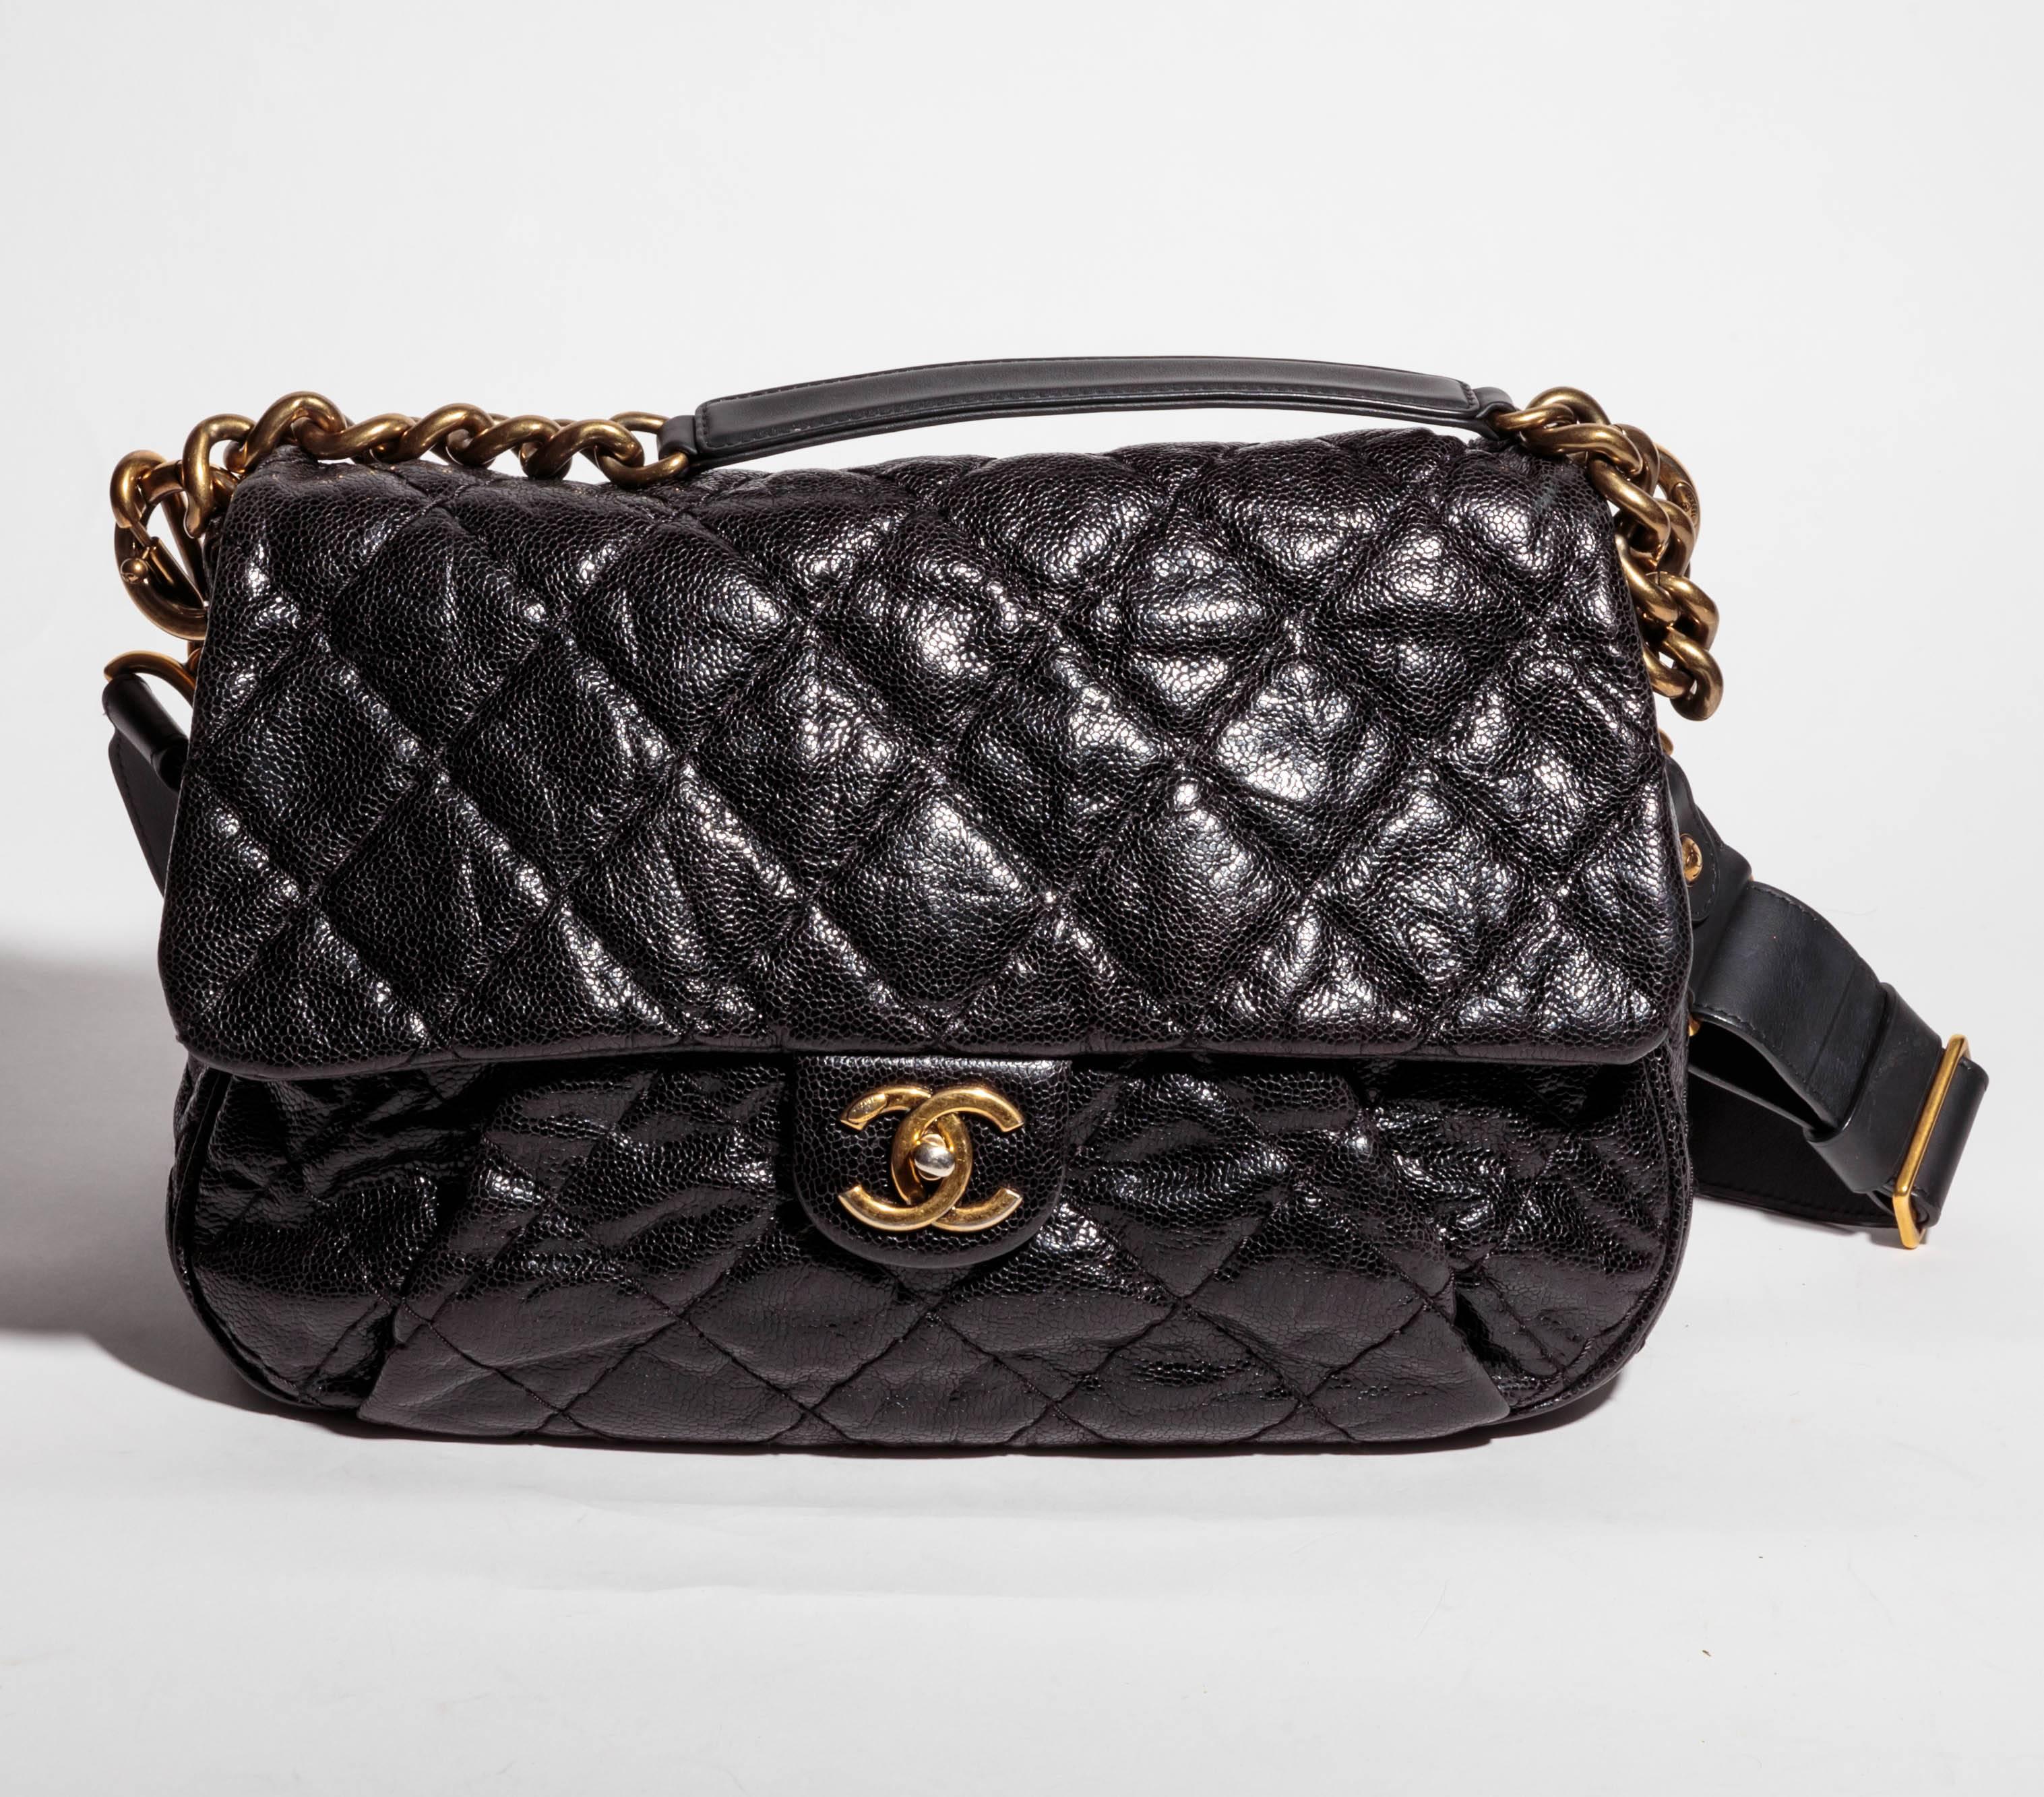 Chanel Coco Pleats Bag with Gold Hardware
Top Handle with Detachable Shoulder Strap / Crossbody
Two interior compartments, one with zip pocket, two flap pockets and key holder
This caviar leather has a slightly metallic sheen 
Condition is very good